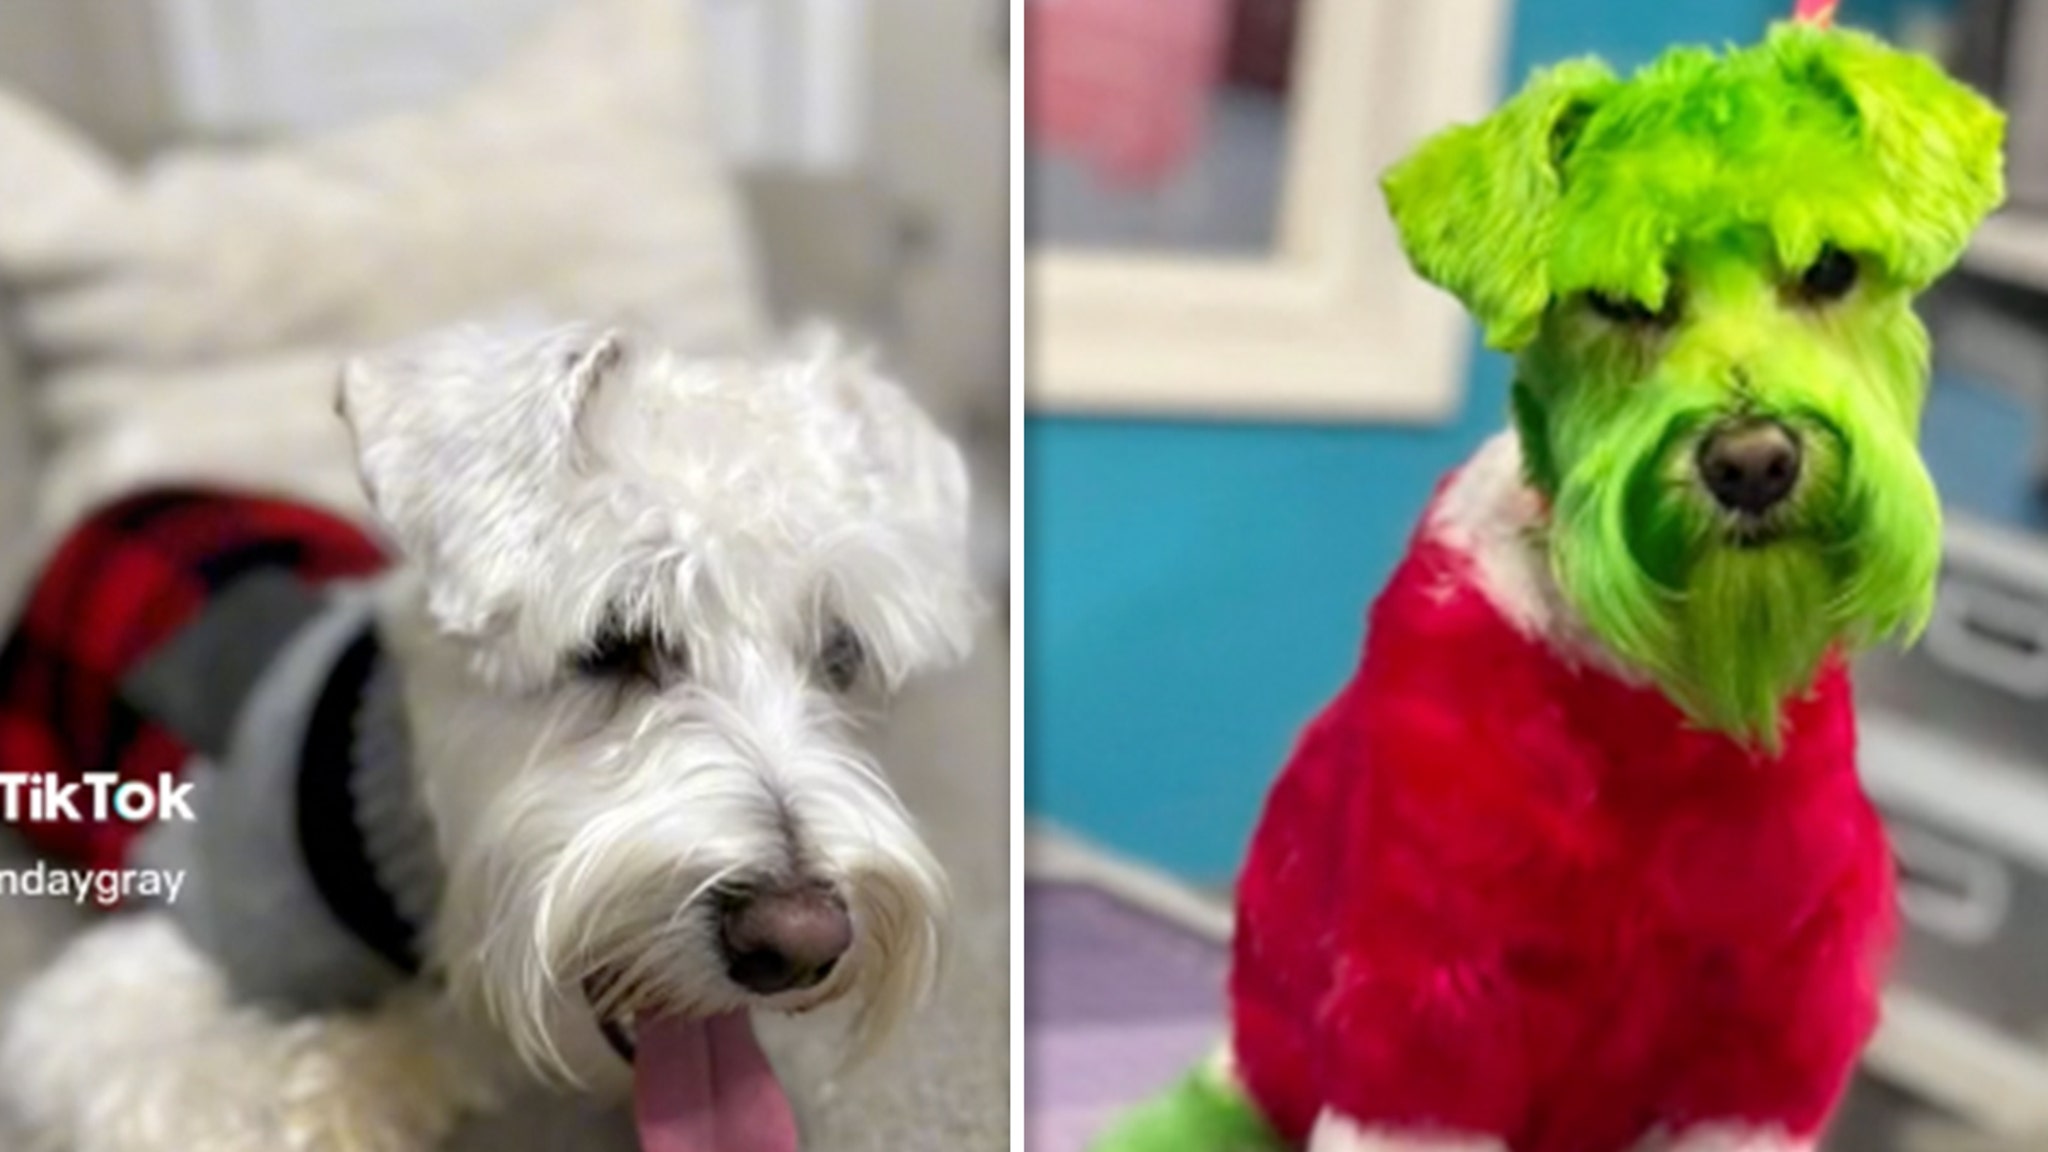 Dog Groomed to Look Like the Grinch, Owner Accused of Animal Abuse